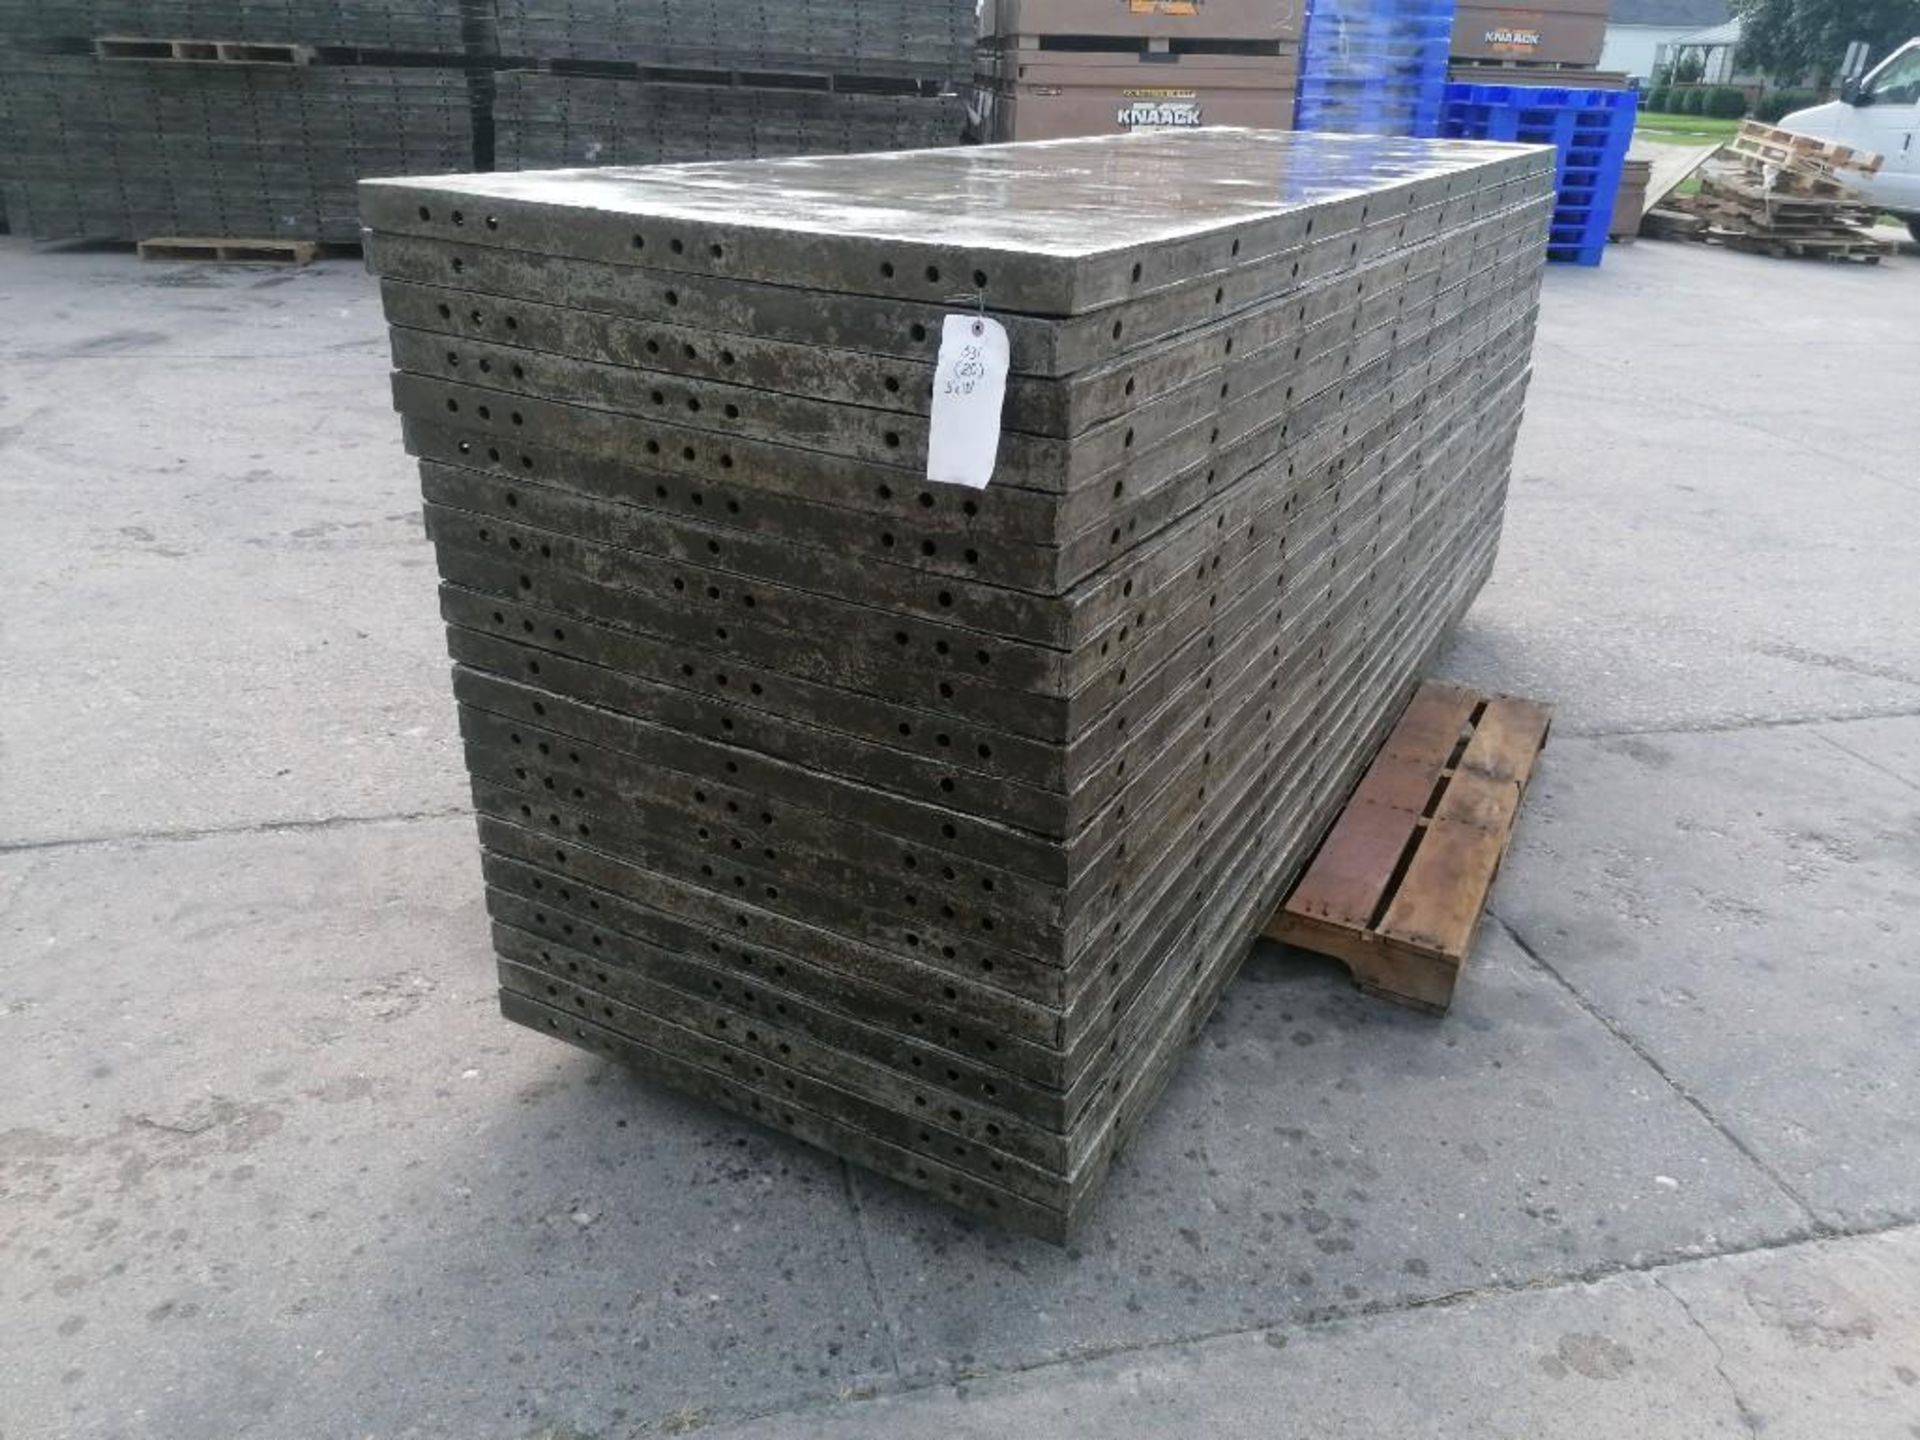 (20) 3' x 10' Wall-Ties Aluminum Concrete Forms, Smooth 6-12 Hole Pattern. Located at 301 E Henry